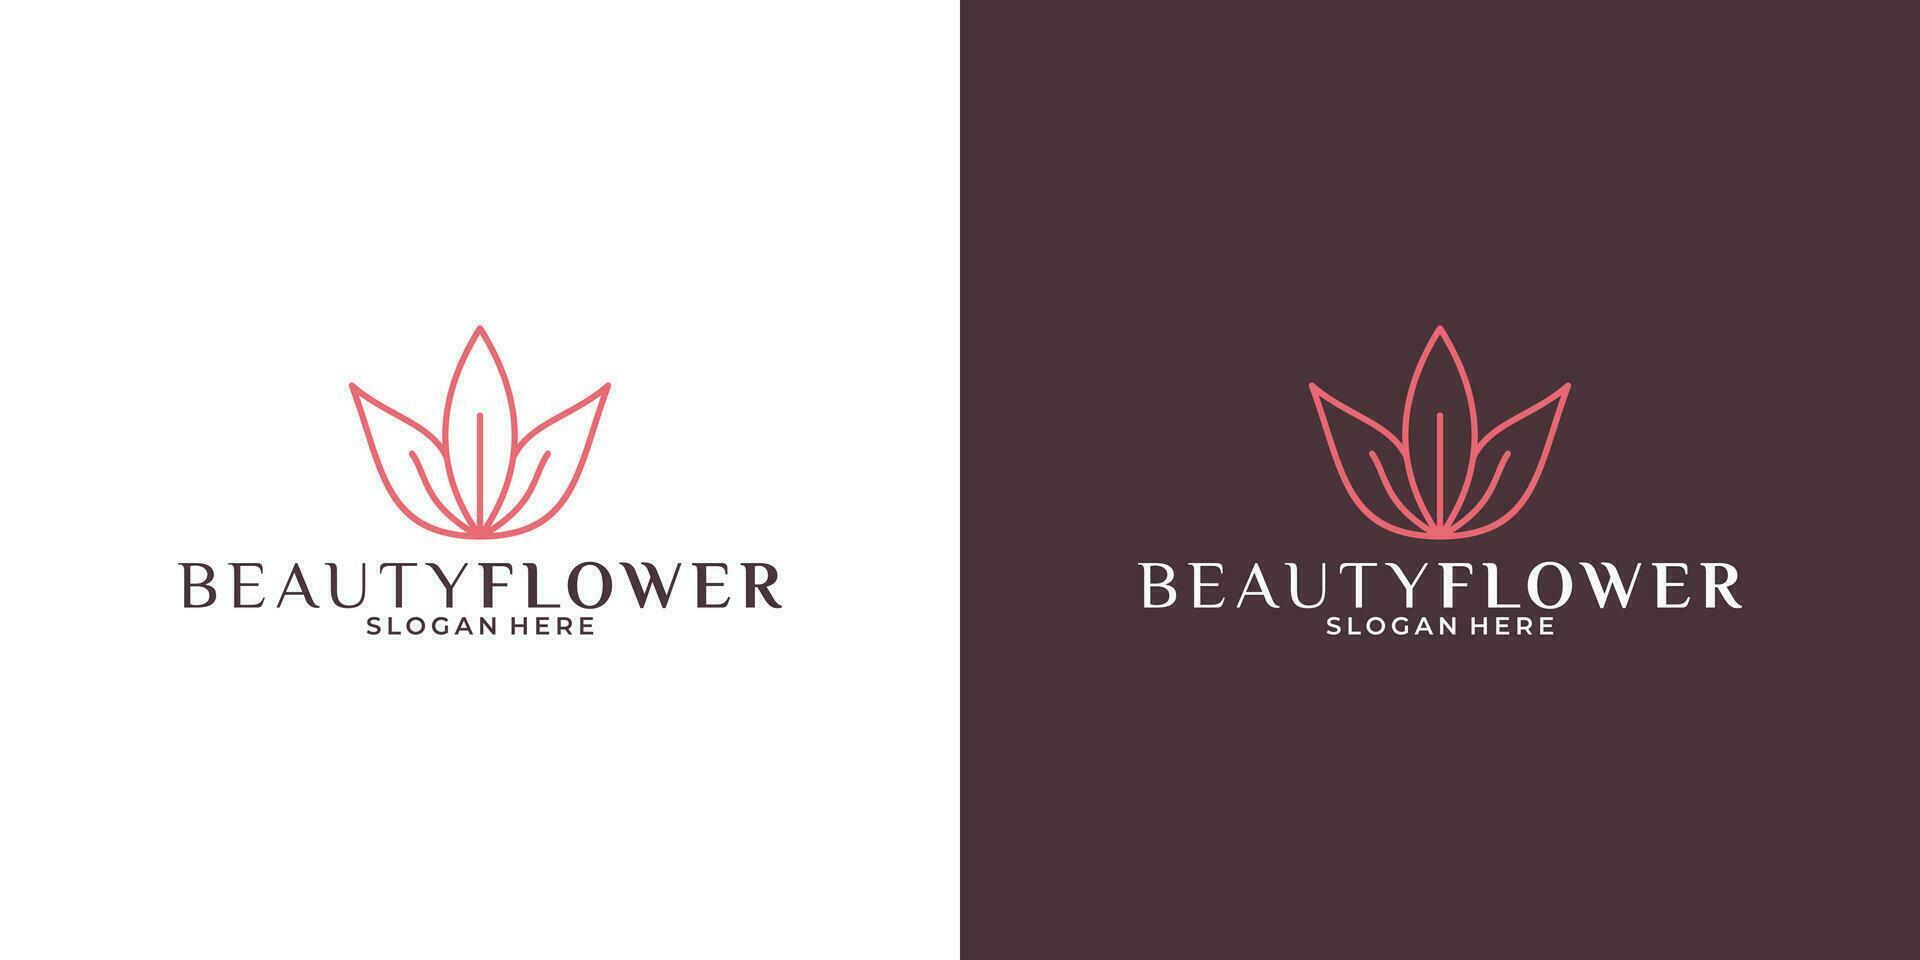 beauty lotus flower logo design for your business saloon, spa, resort, cosmetic, fashion etc vector